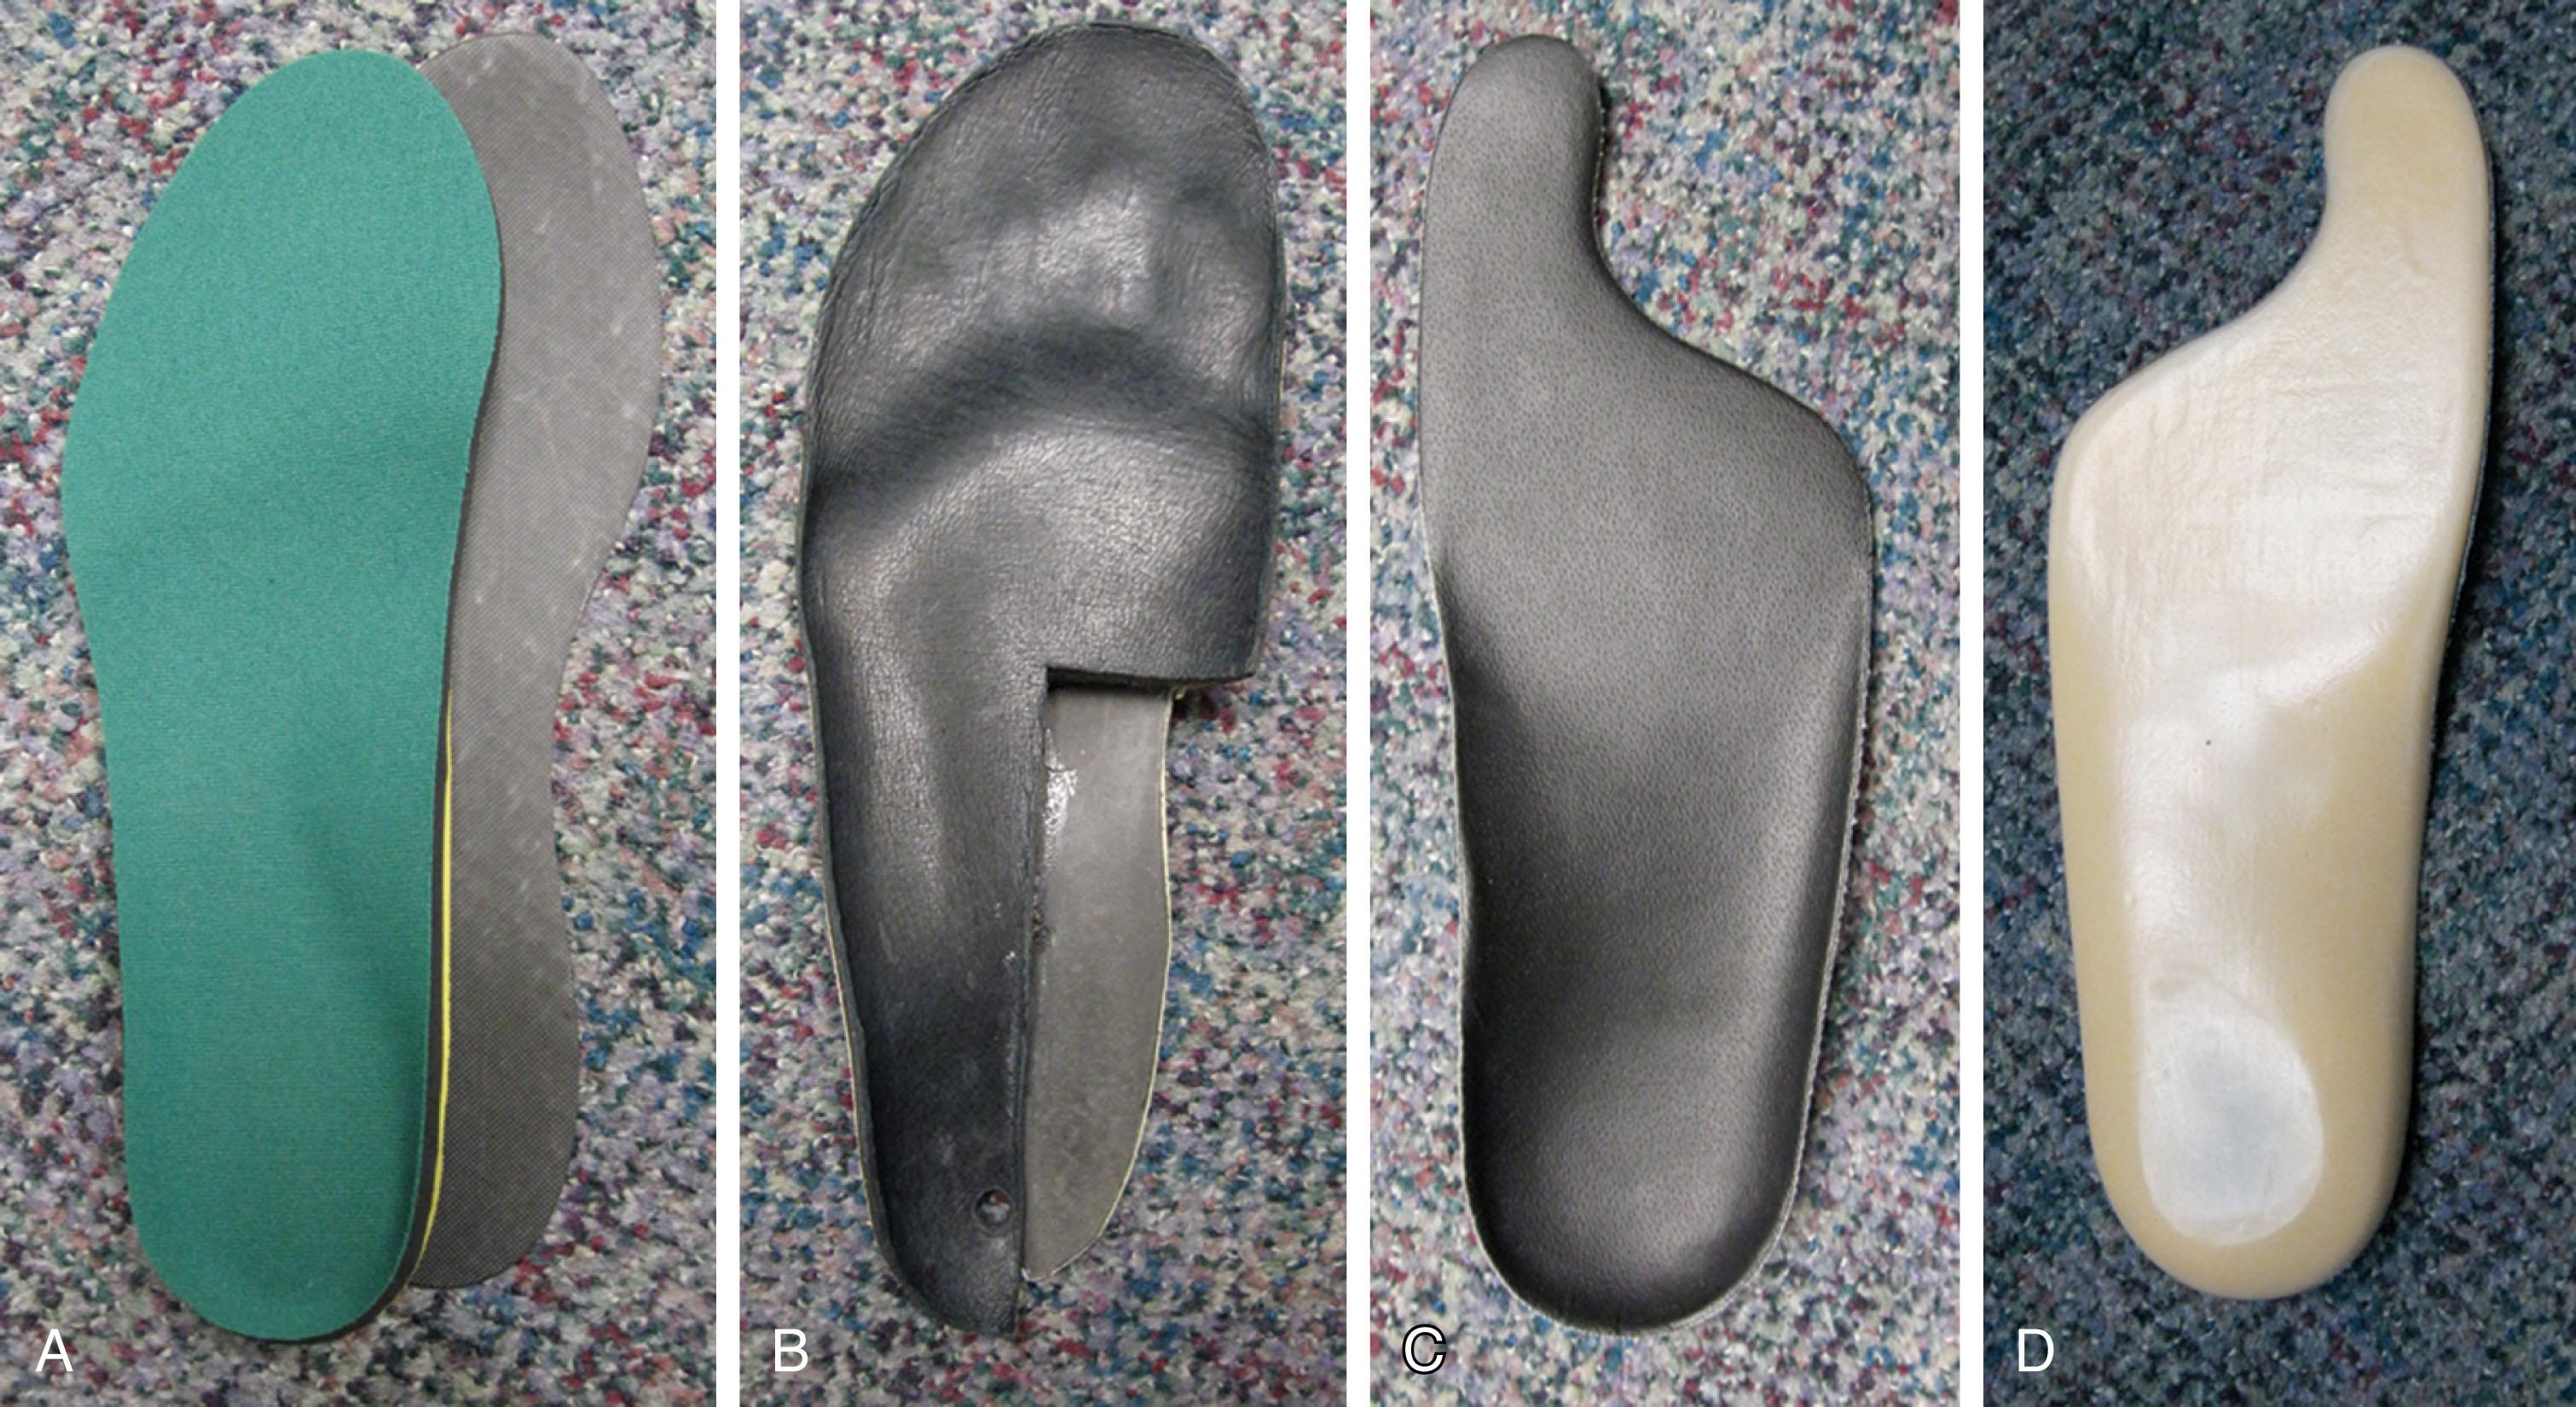 Fig. 27-11, Orthoses for hallux rigidus. A , Soft insole with graphite orthosis beneath, which stiffens entire insole, restricting metatarsophalangeal (MTP) joint excursion. B , Composite orthosis with gel and graphite combined. C , Orthotic with “Morton extension” to restrict MTP joint motion. D , Same orthotic from plantar aspect.